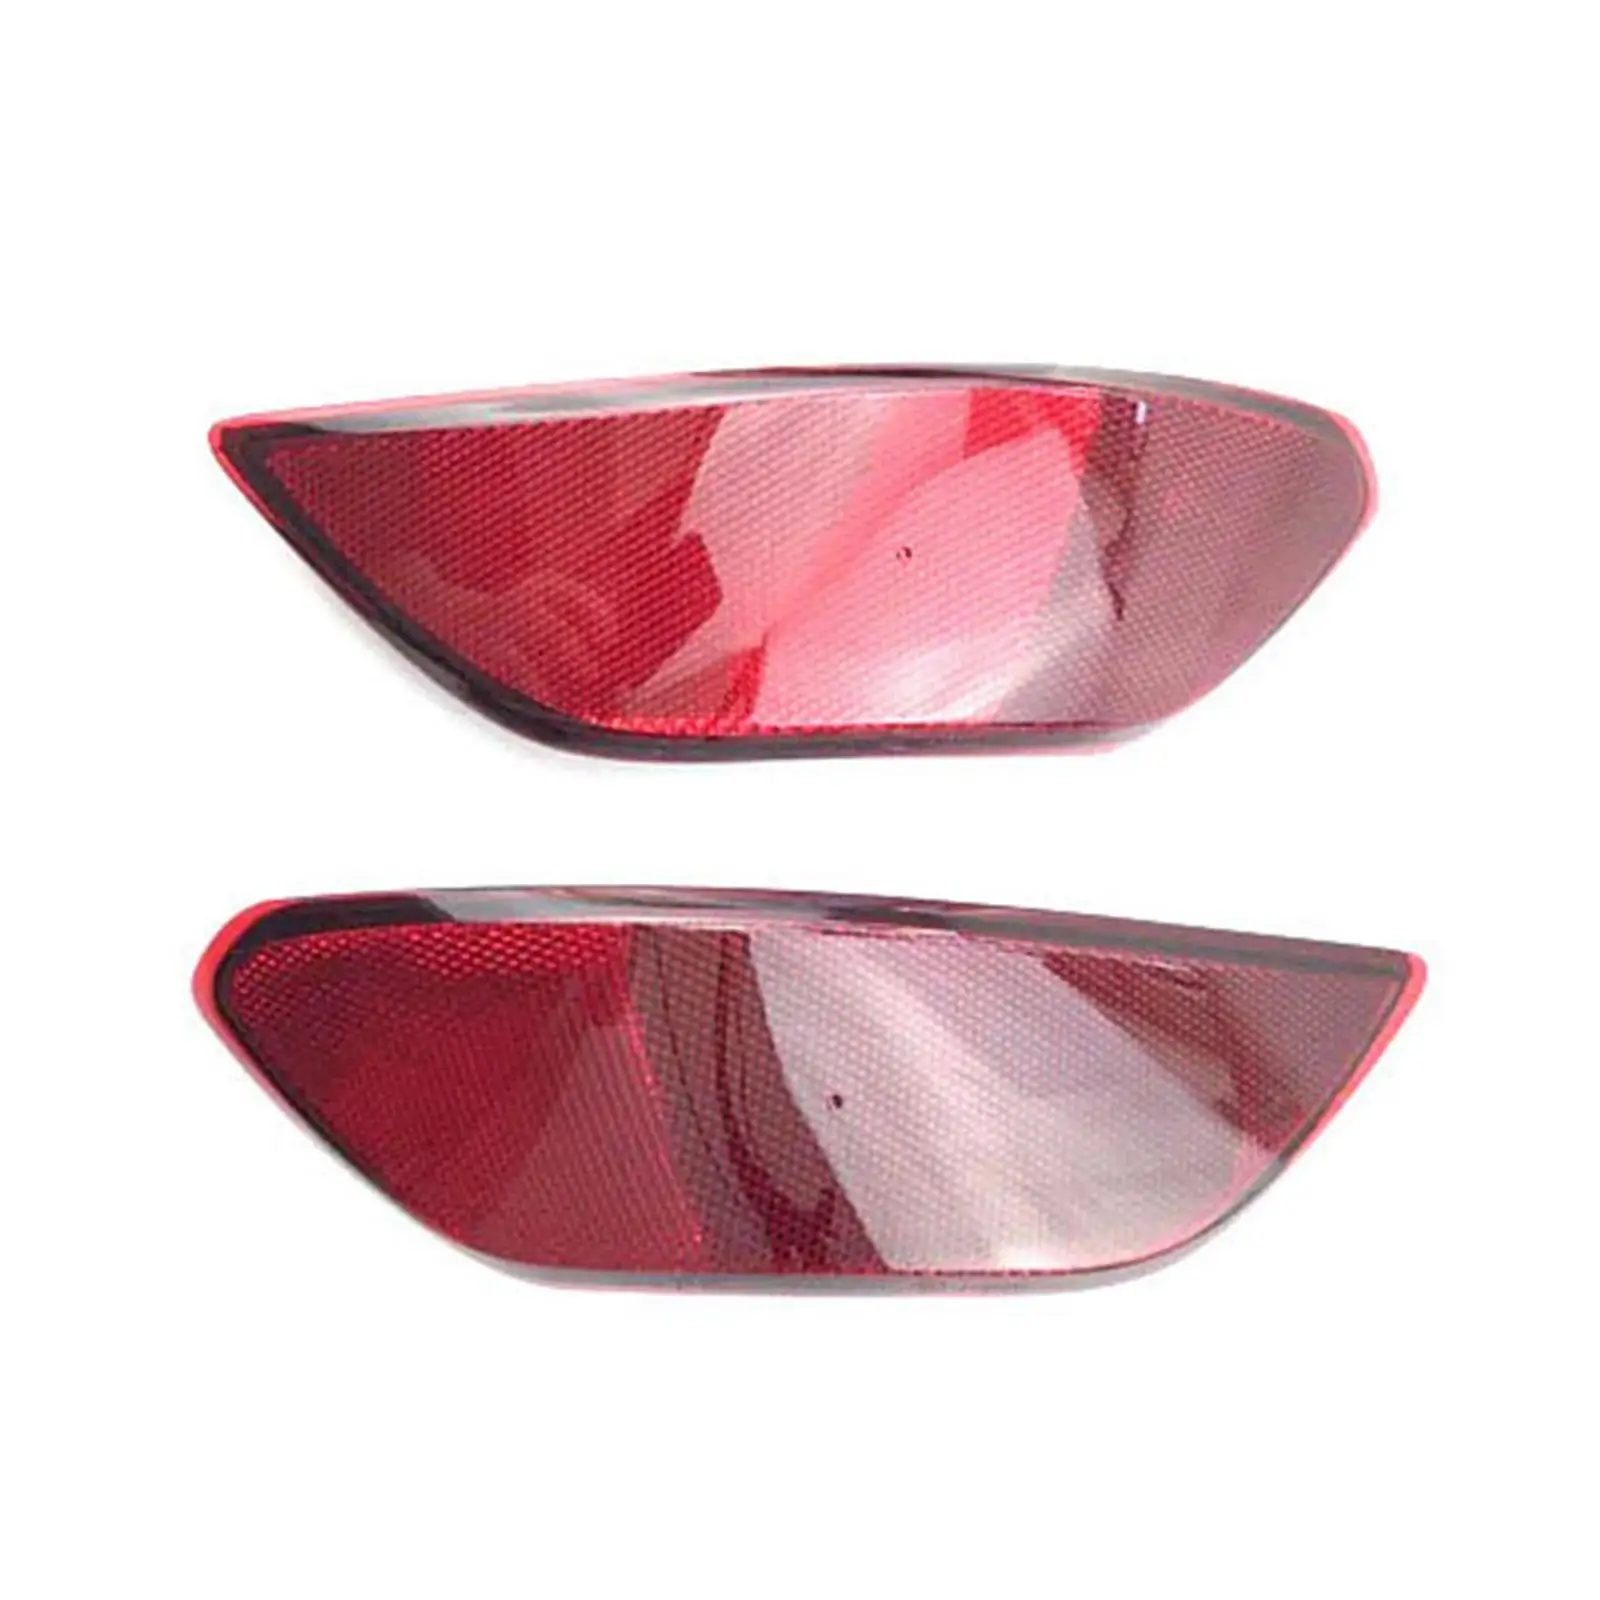 Reflector for Car Rear Replacement Drivers Rear Bumper Trim Reflector Marker for Porsche Cayenne Side Marker Light Assembly